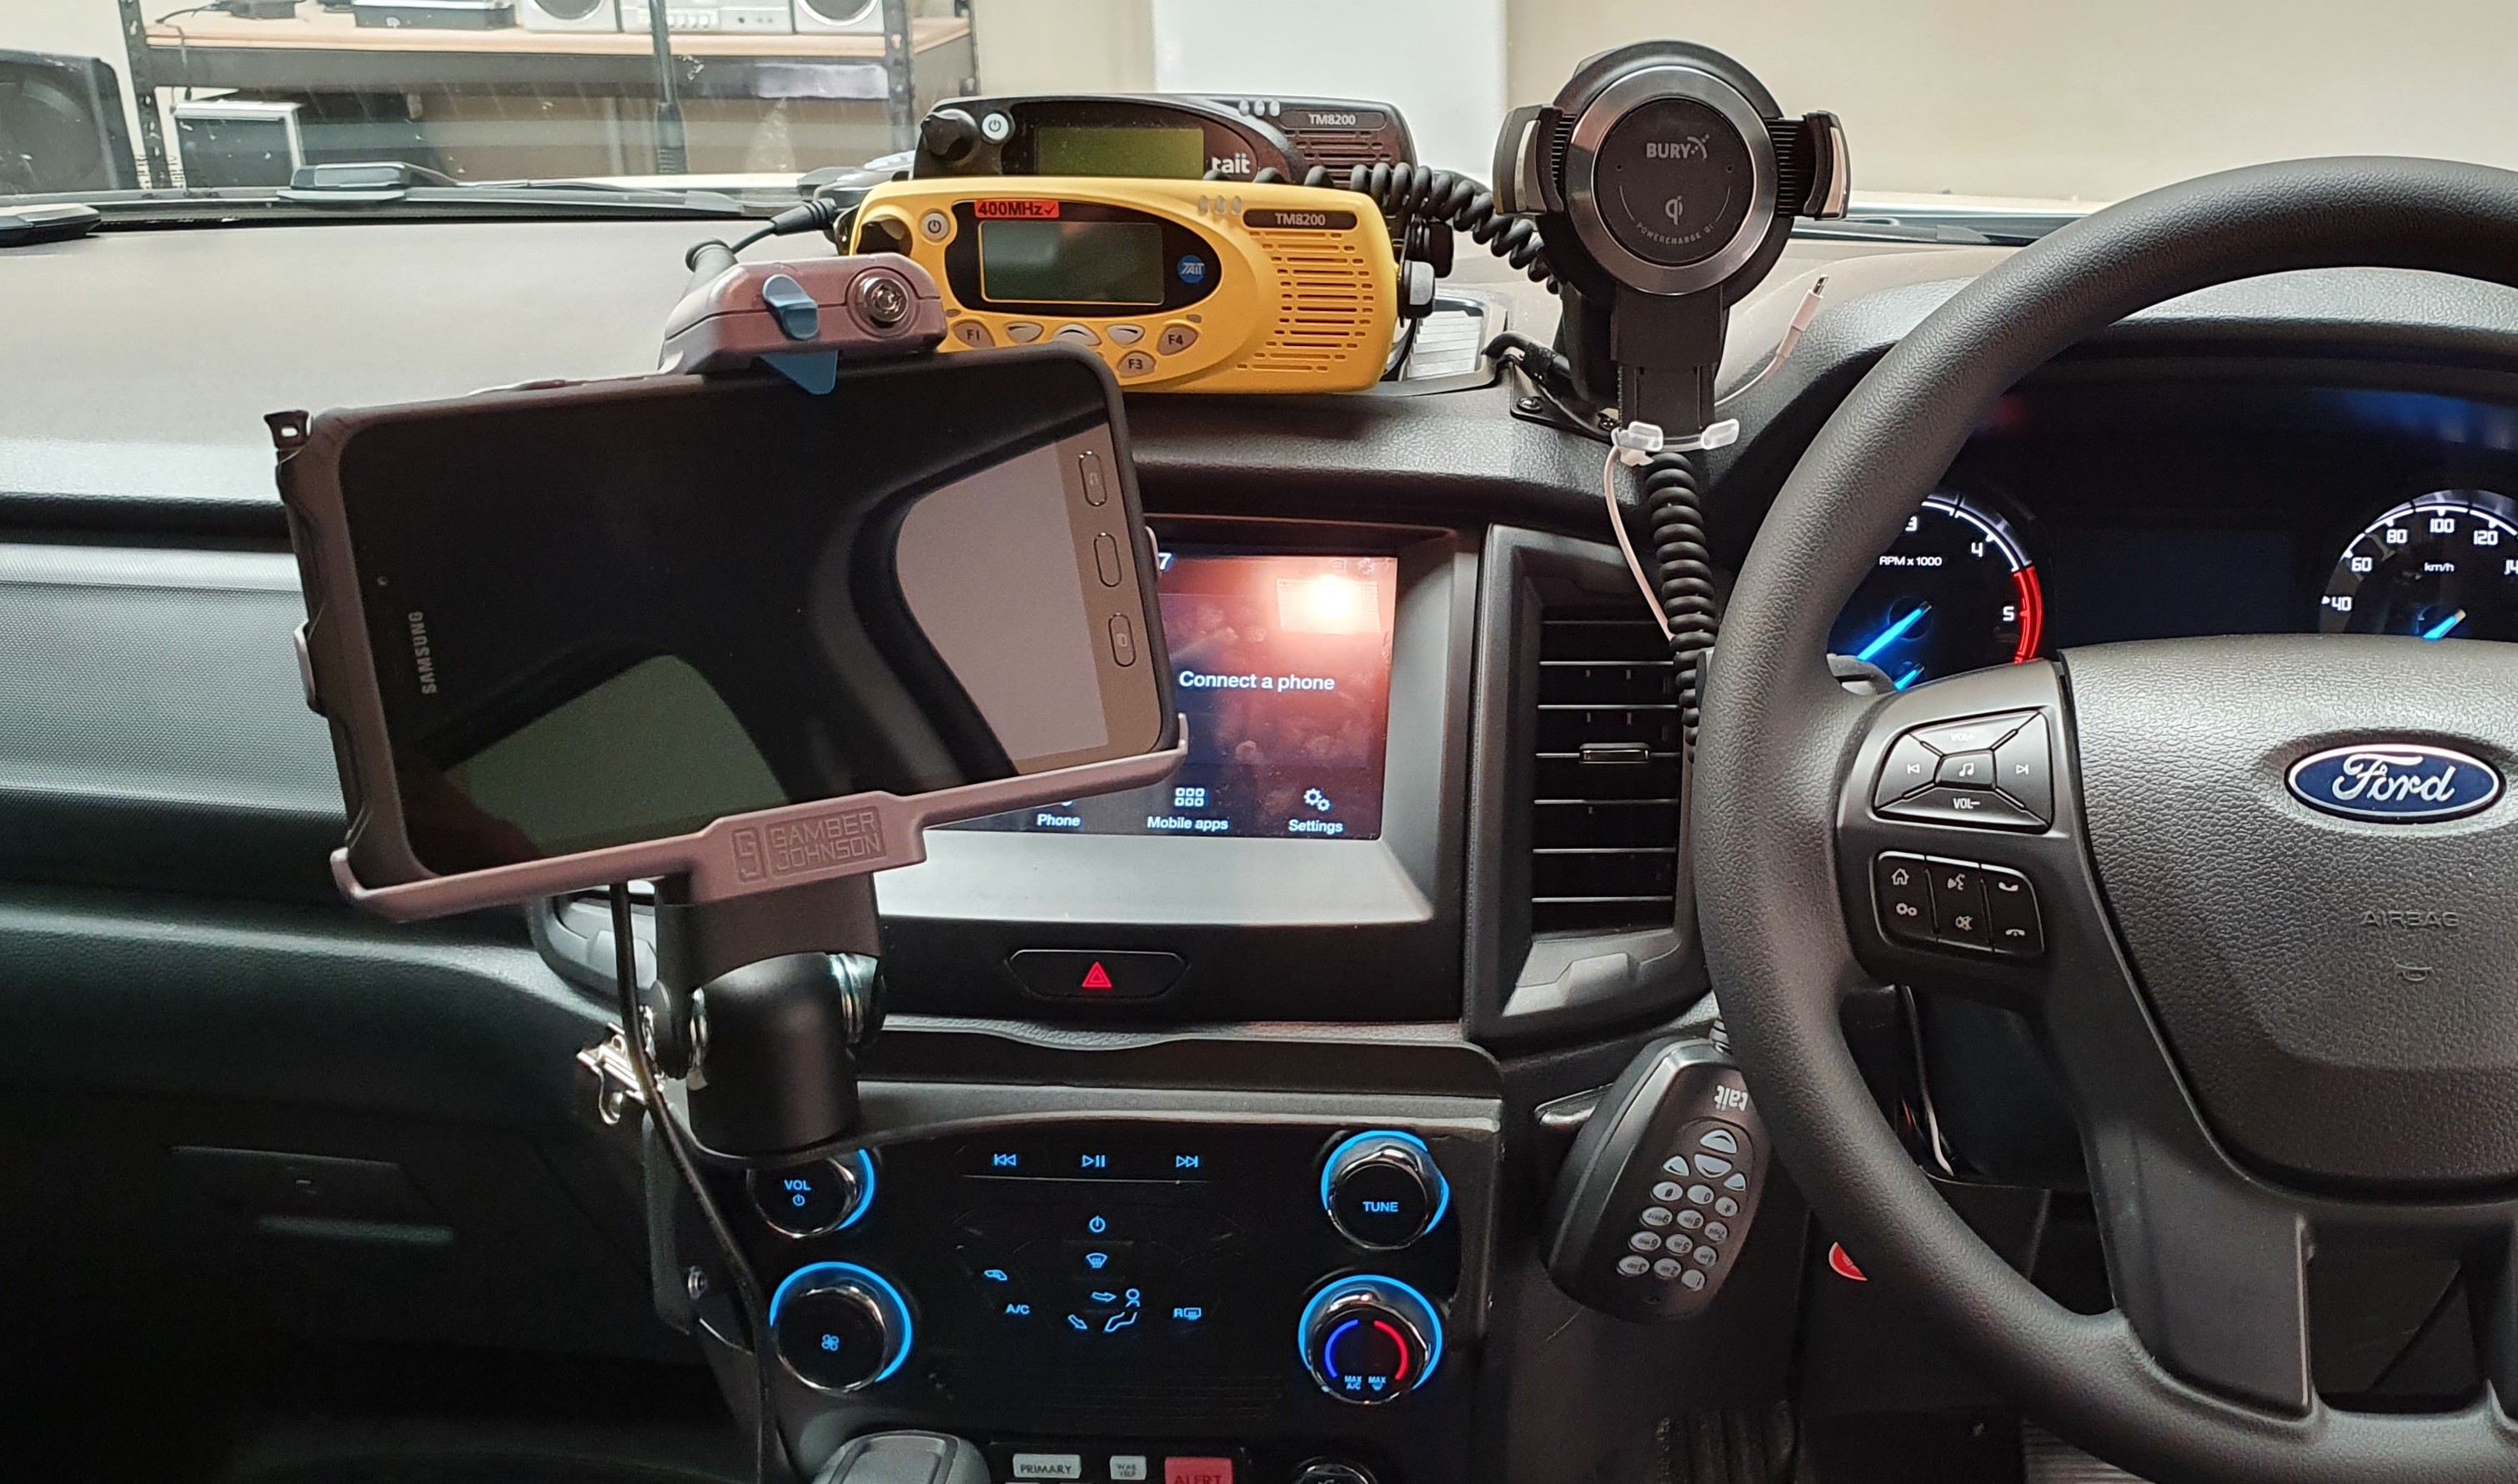 The Samsung Tab Active 3 dash mounted in a Ford Ranger